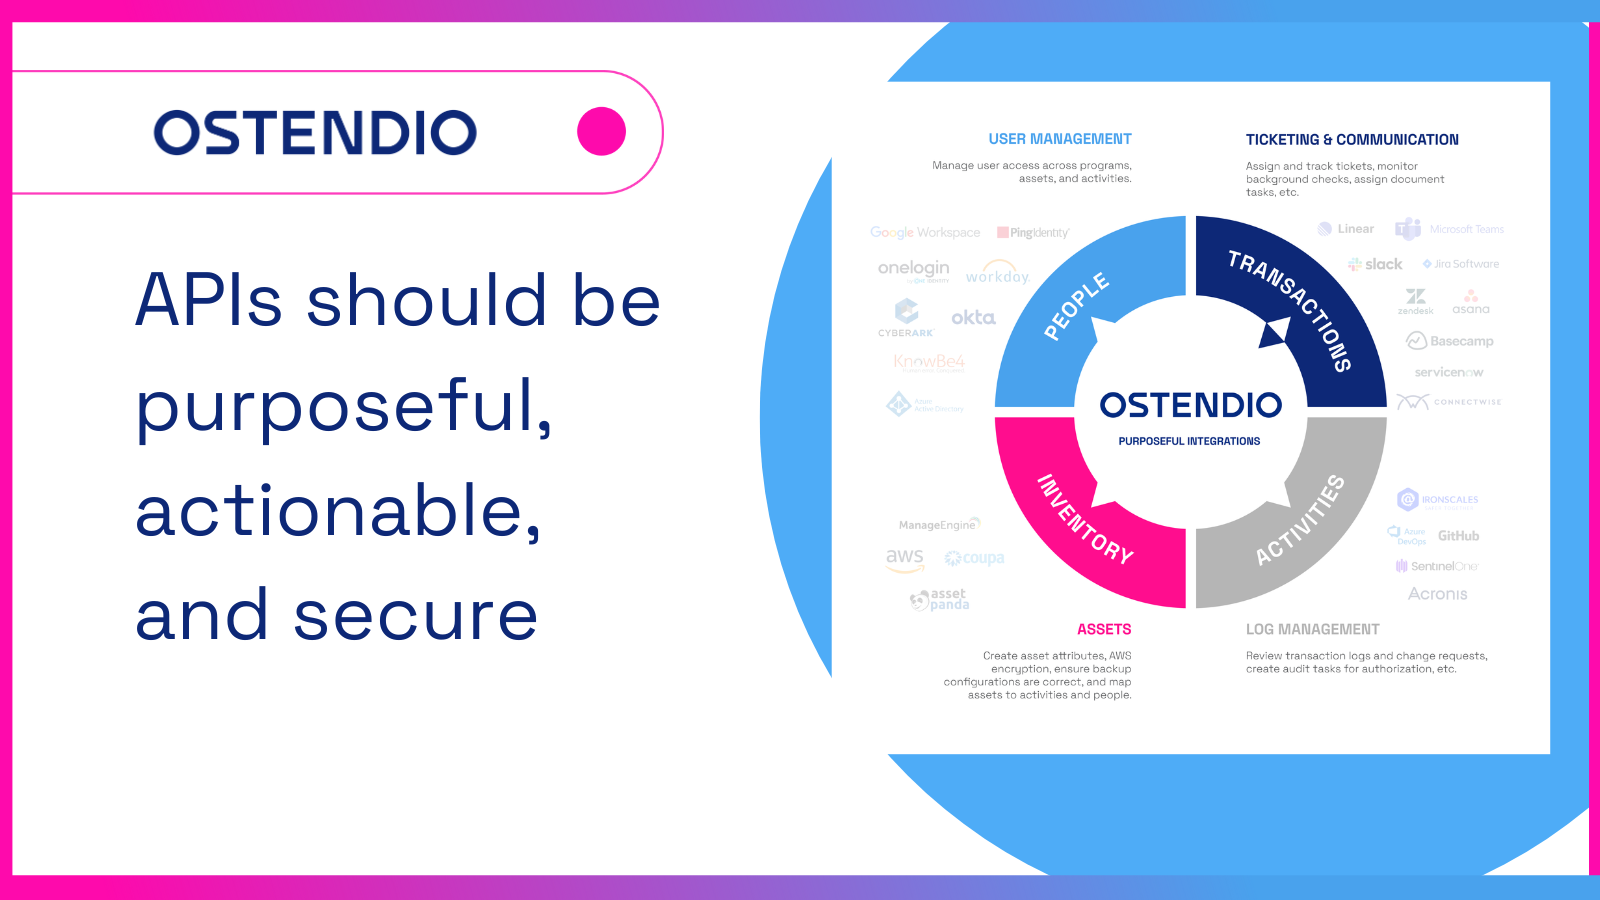 Ostendio integrations are purposeful, actionable and secure